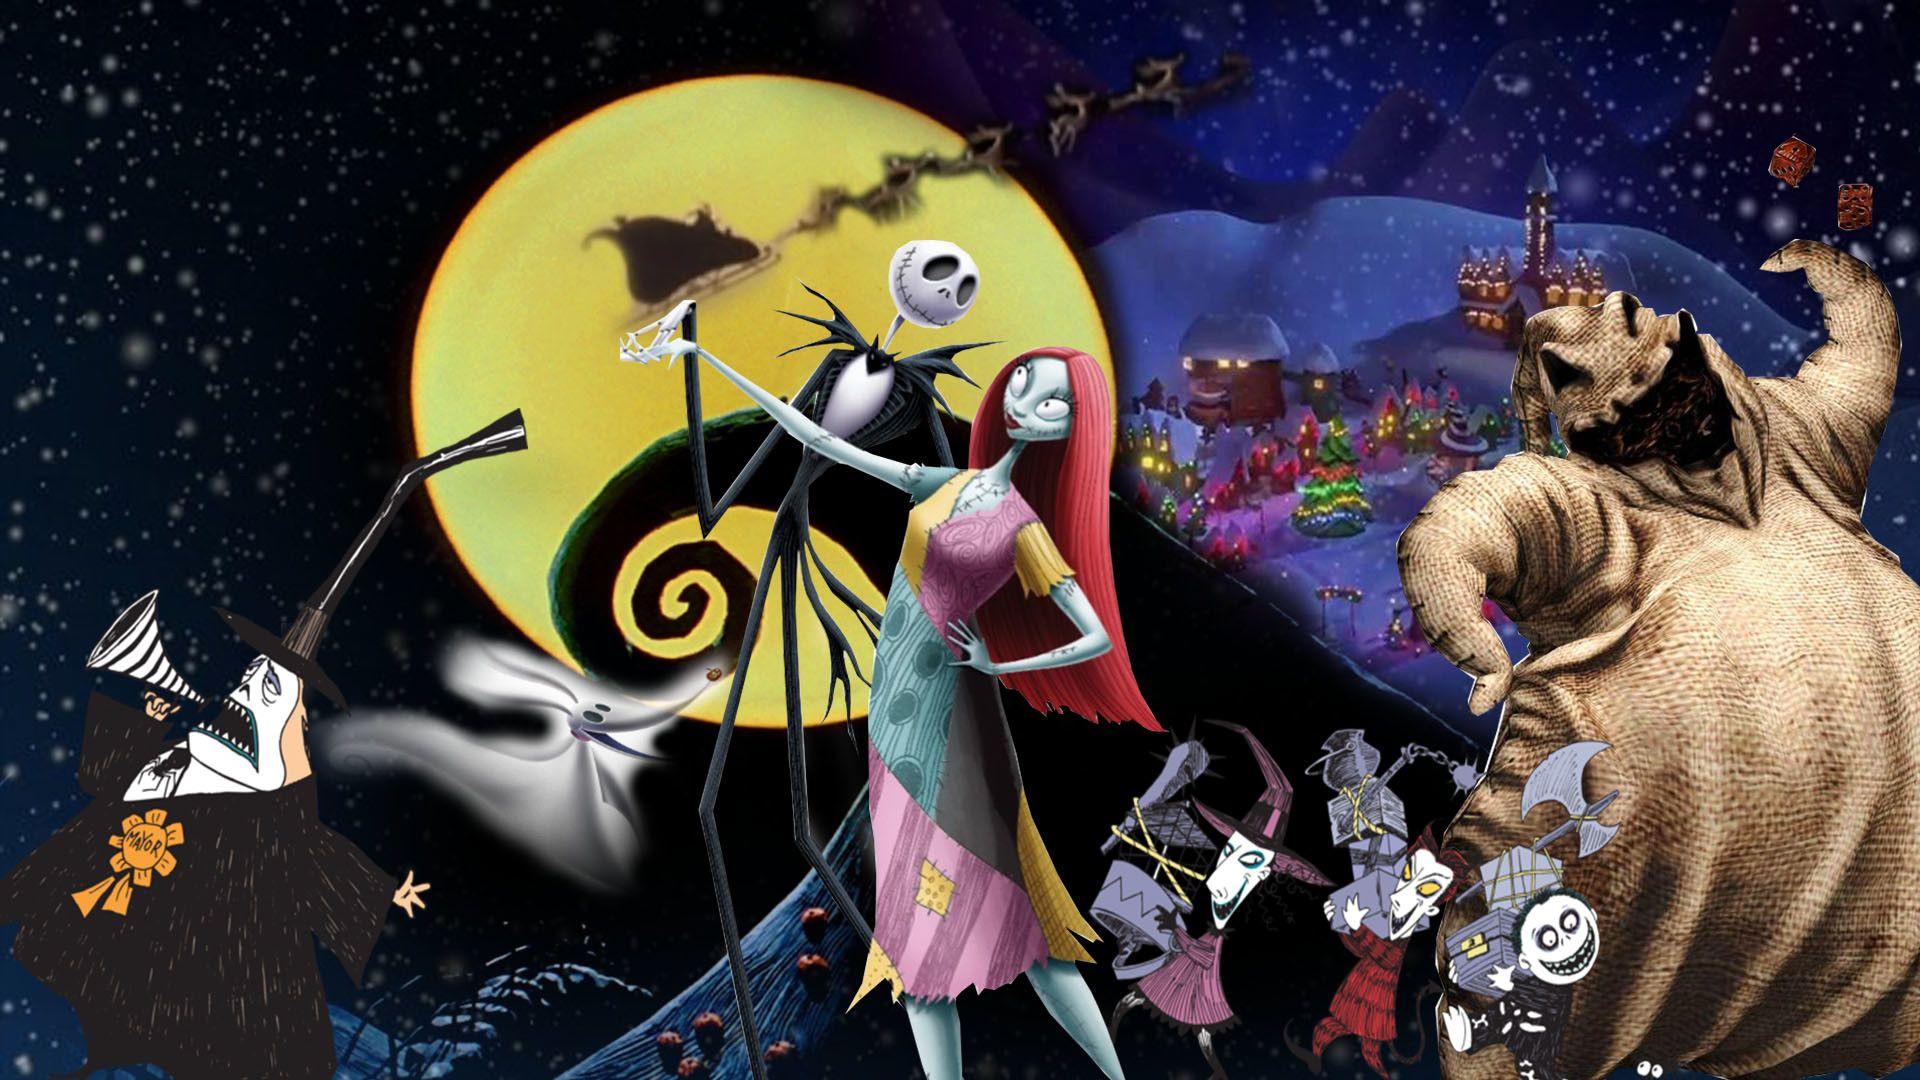 The Nightmare Before Christmas Wallpaper background picture